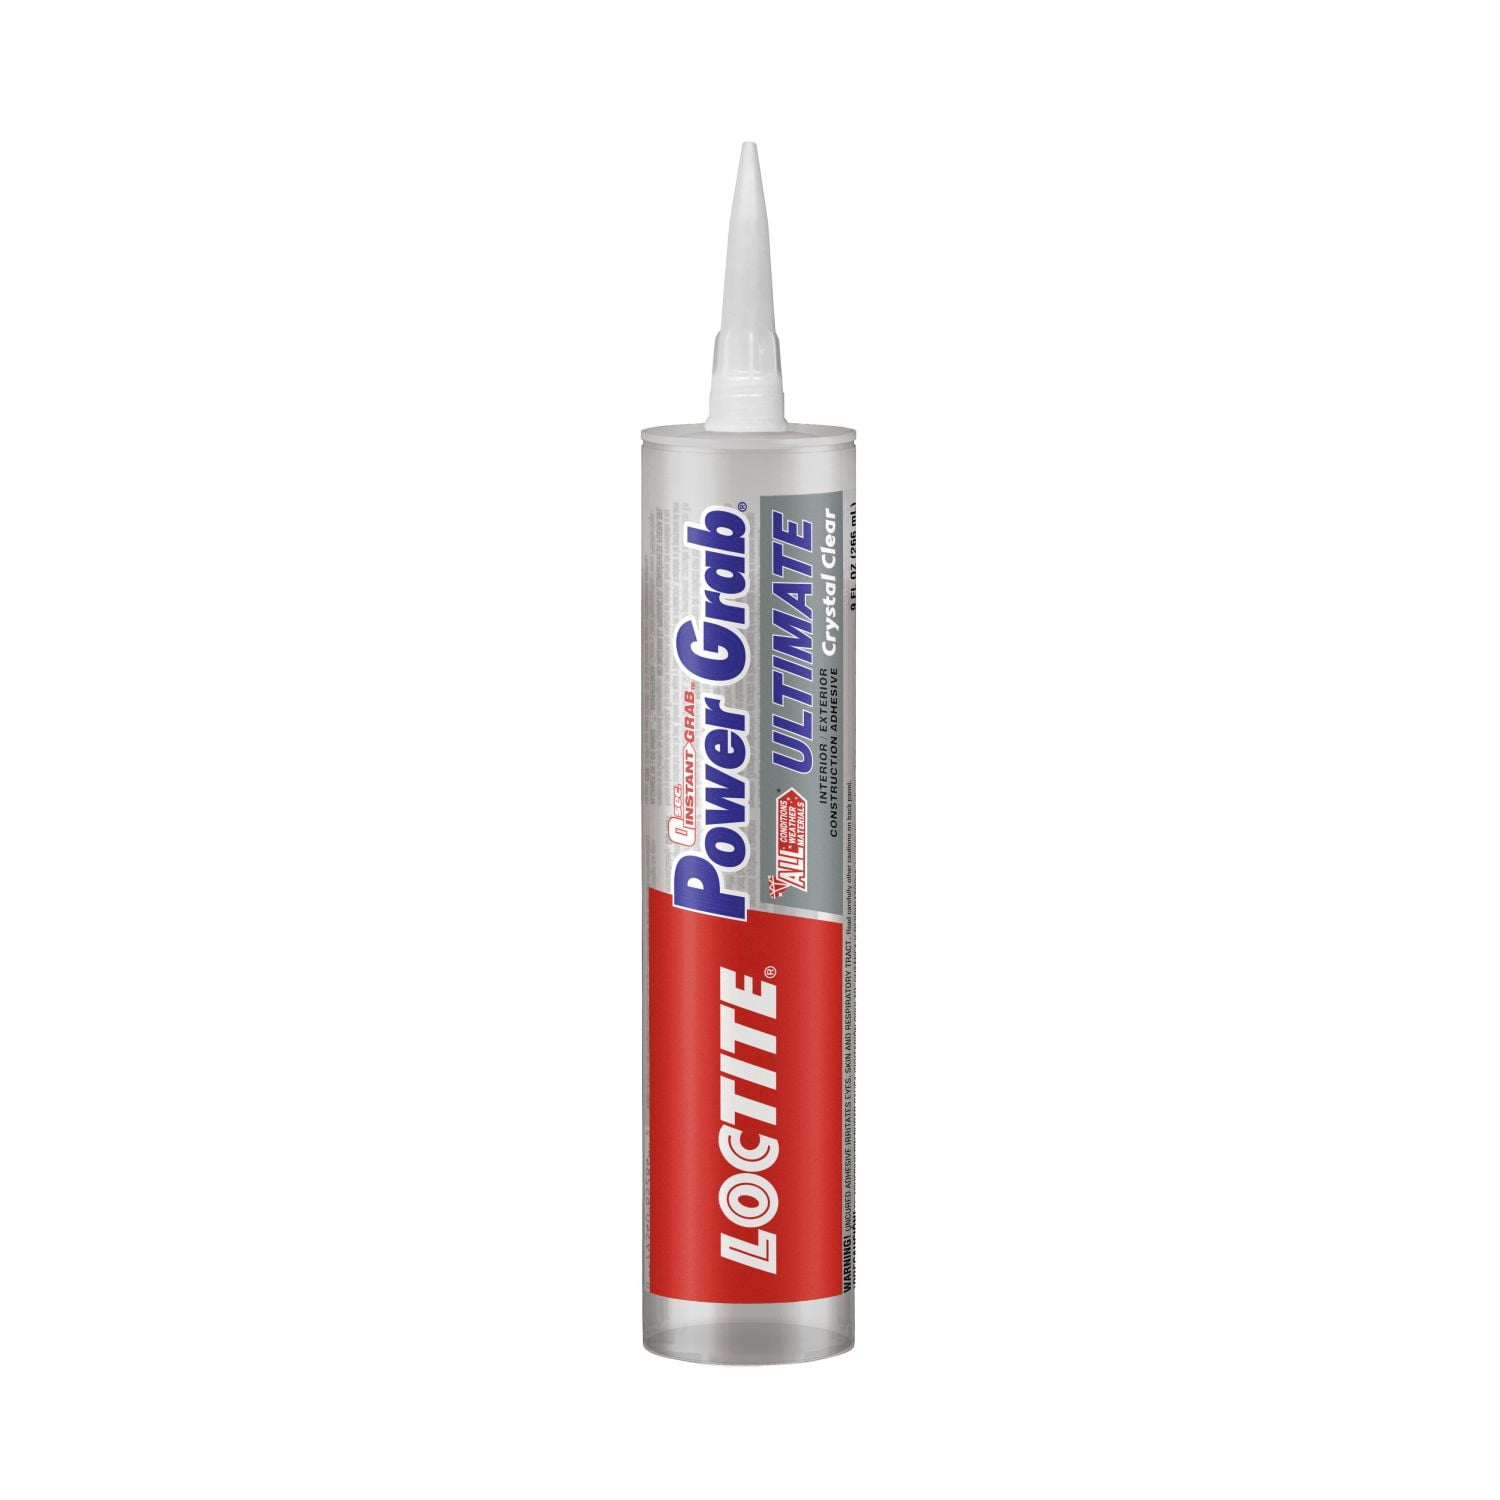 Loctite Power Grab Construction Adhesive Ultimate Crystal Clear